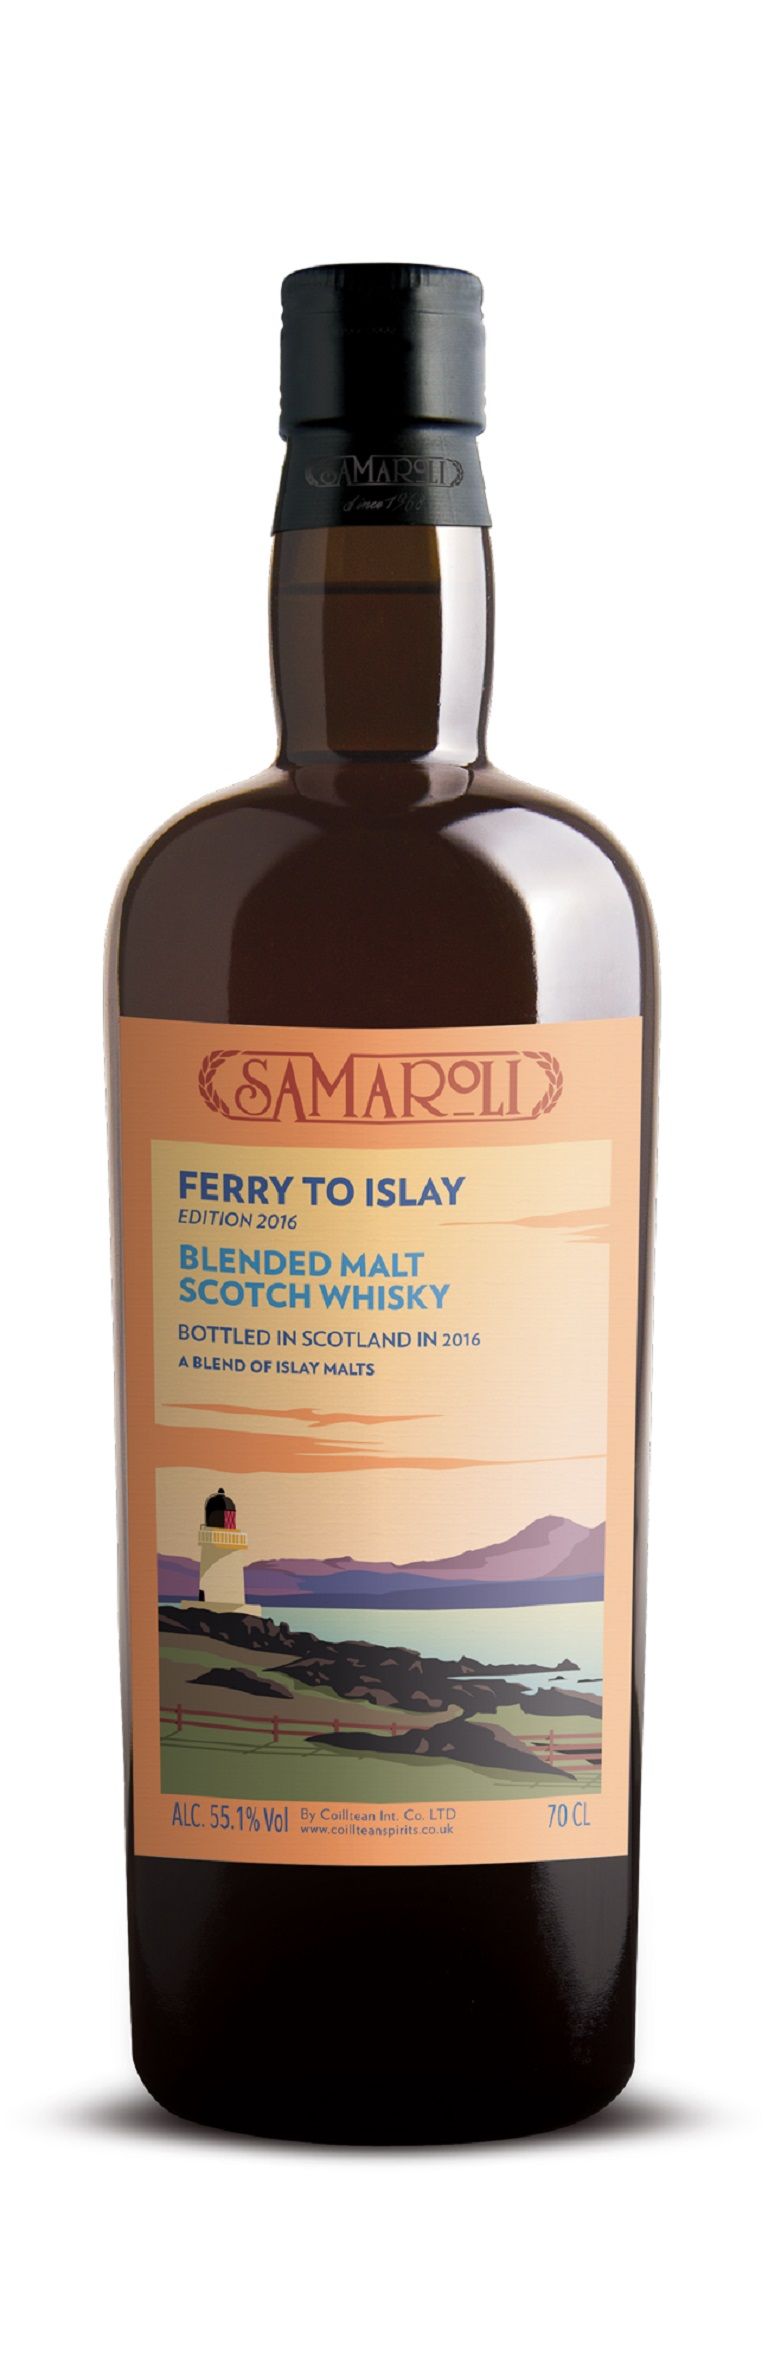 Ferry to Islay - Blended Malt Scotch Whisky - ed. 2016 - 70 cl